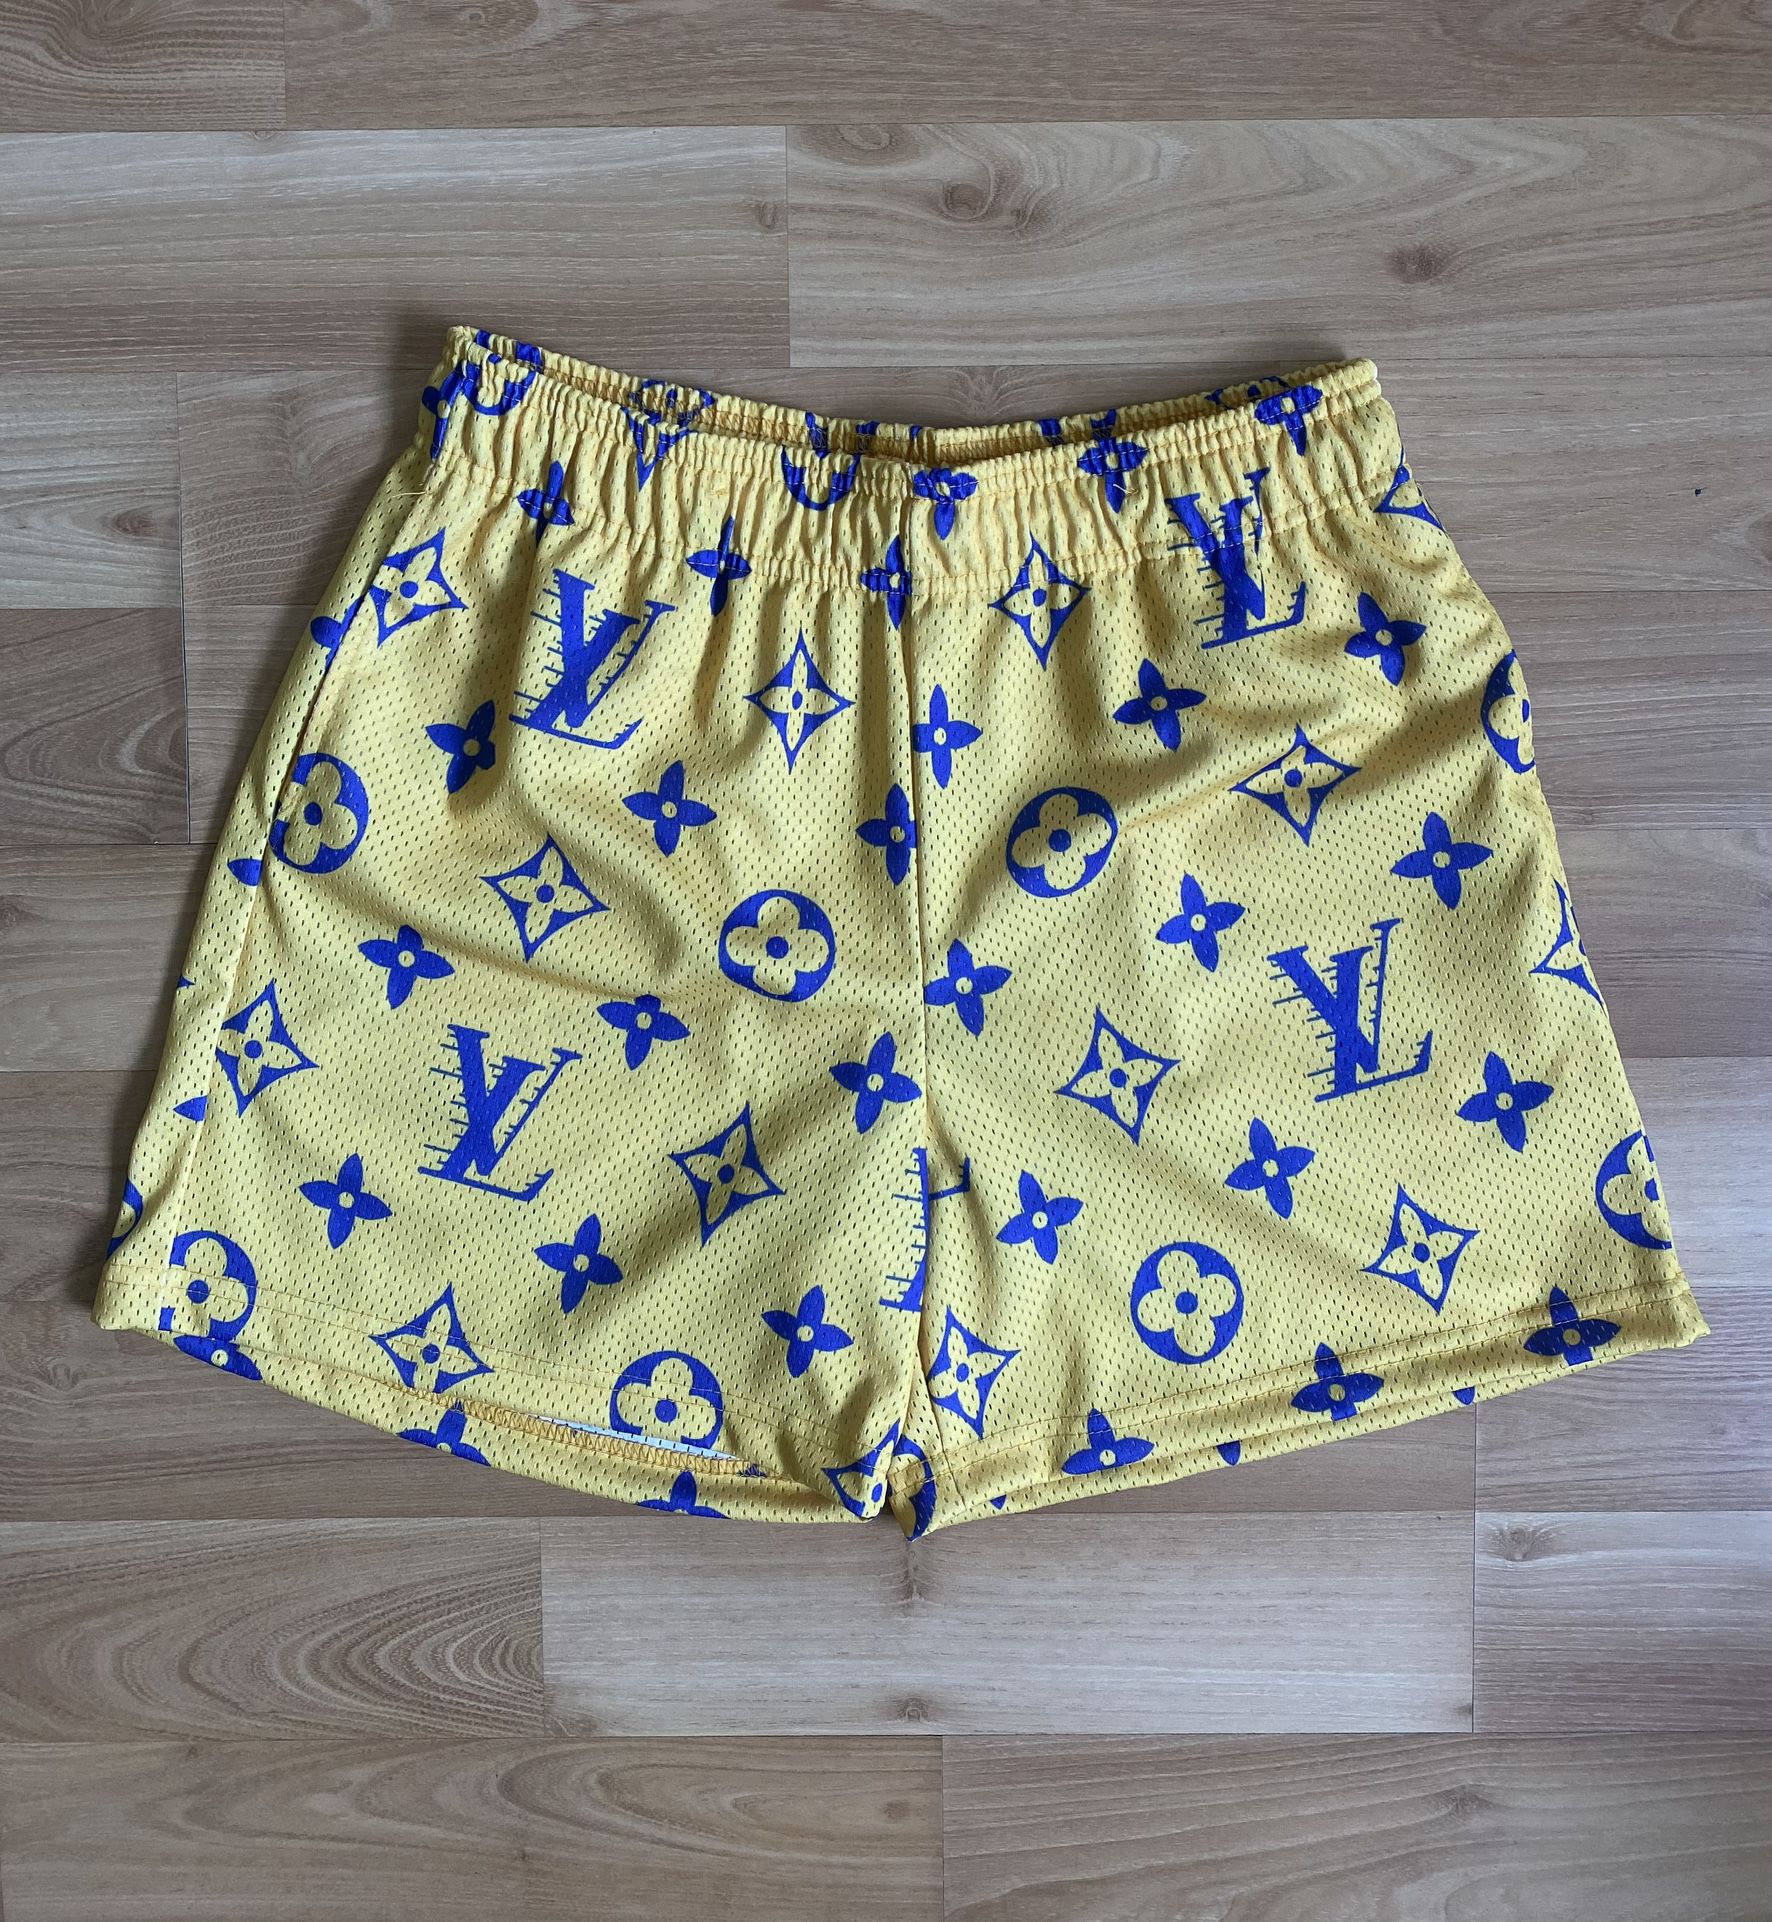 Bravest Studios Lakeshow Shorts (Yellow) for Sale in Los Angeles, CA -  OfferUp